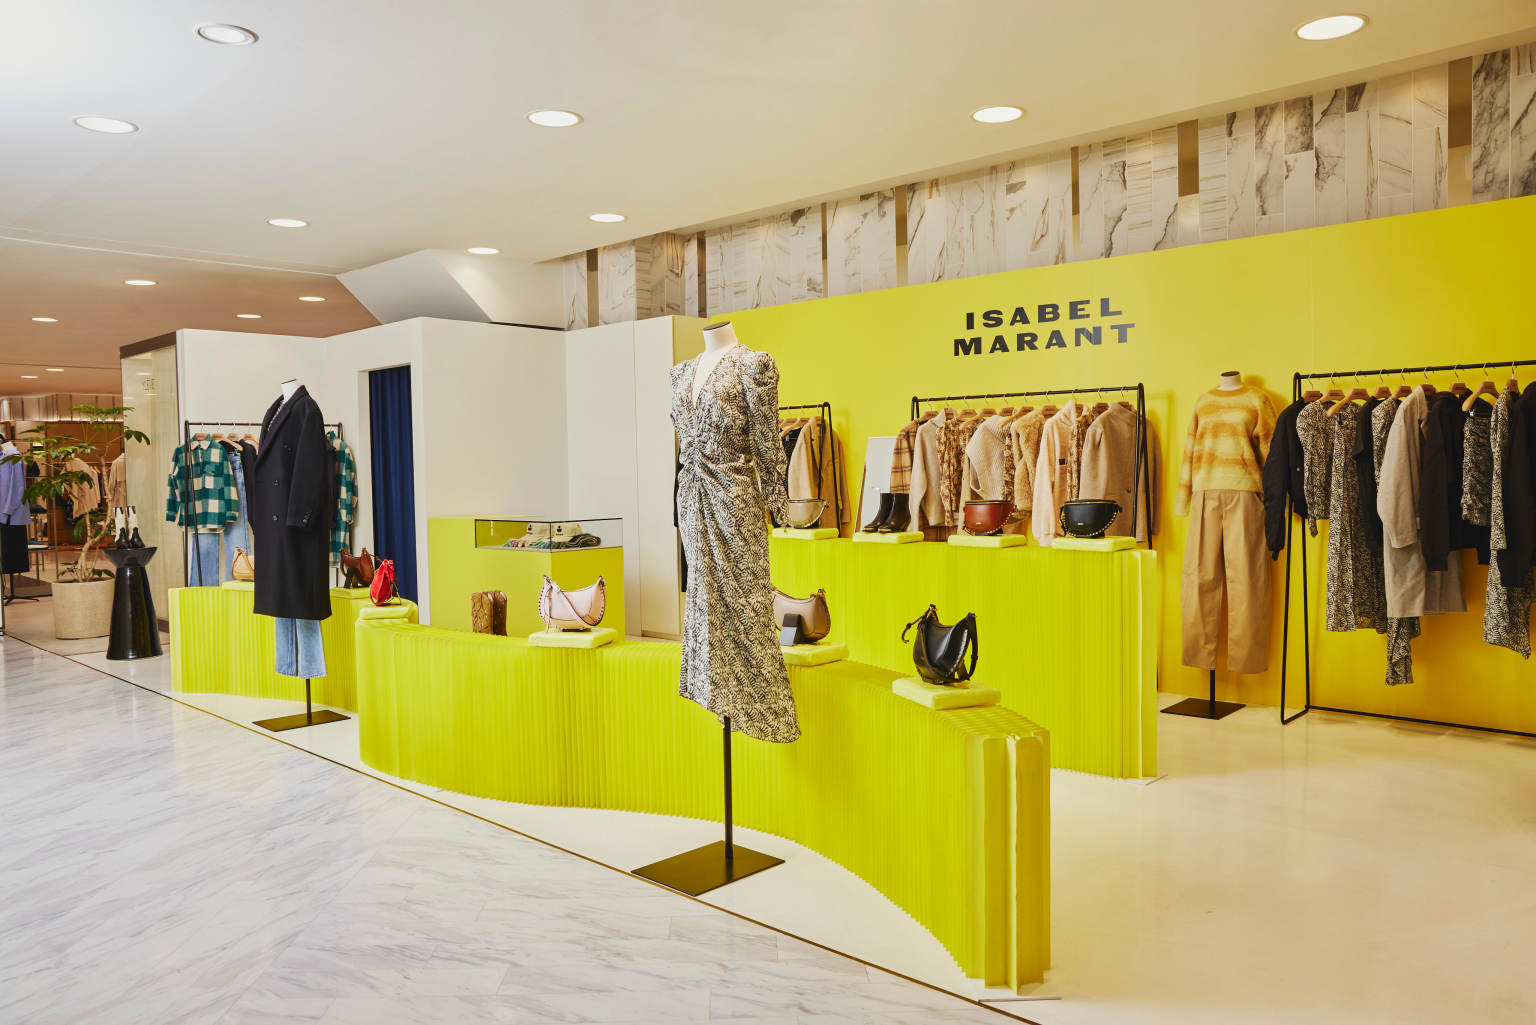 Image of yellow display area featuring the Isabel Marant clothing collection, including sweaters, pants, dresses and handbags.